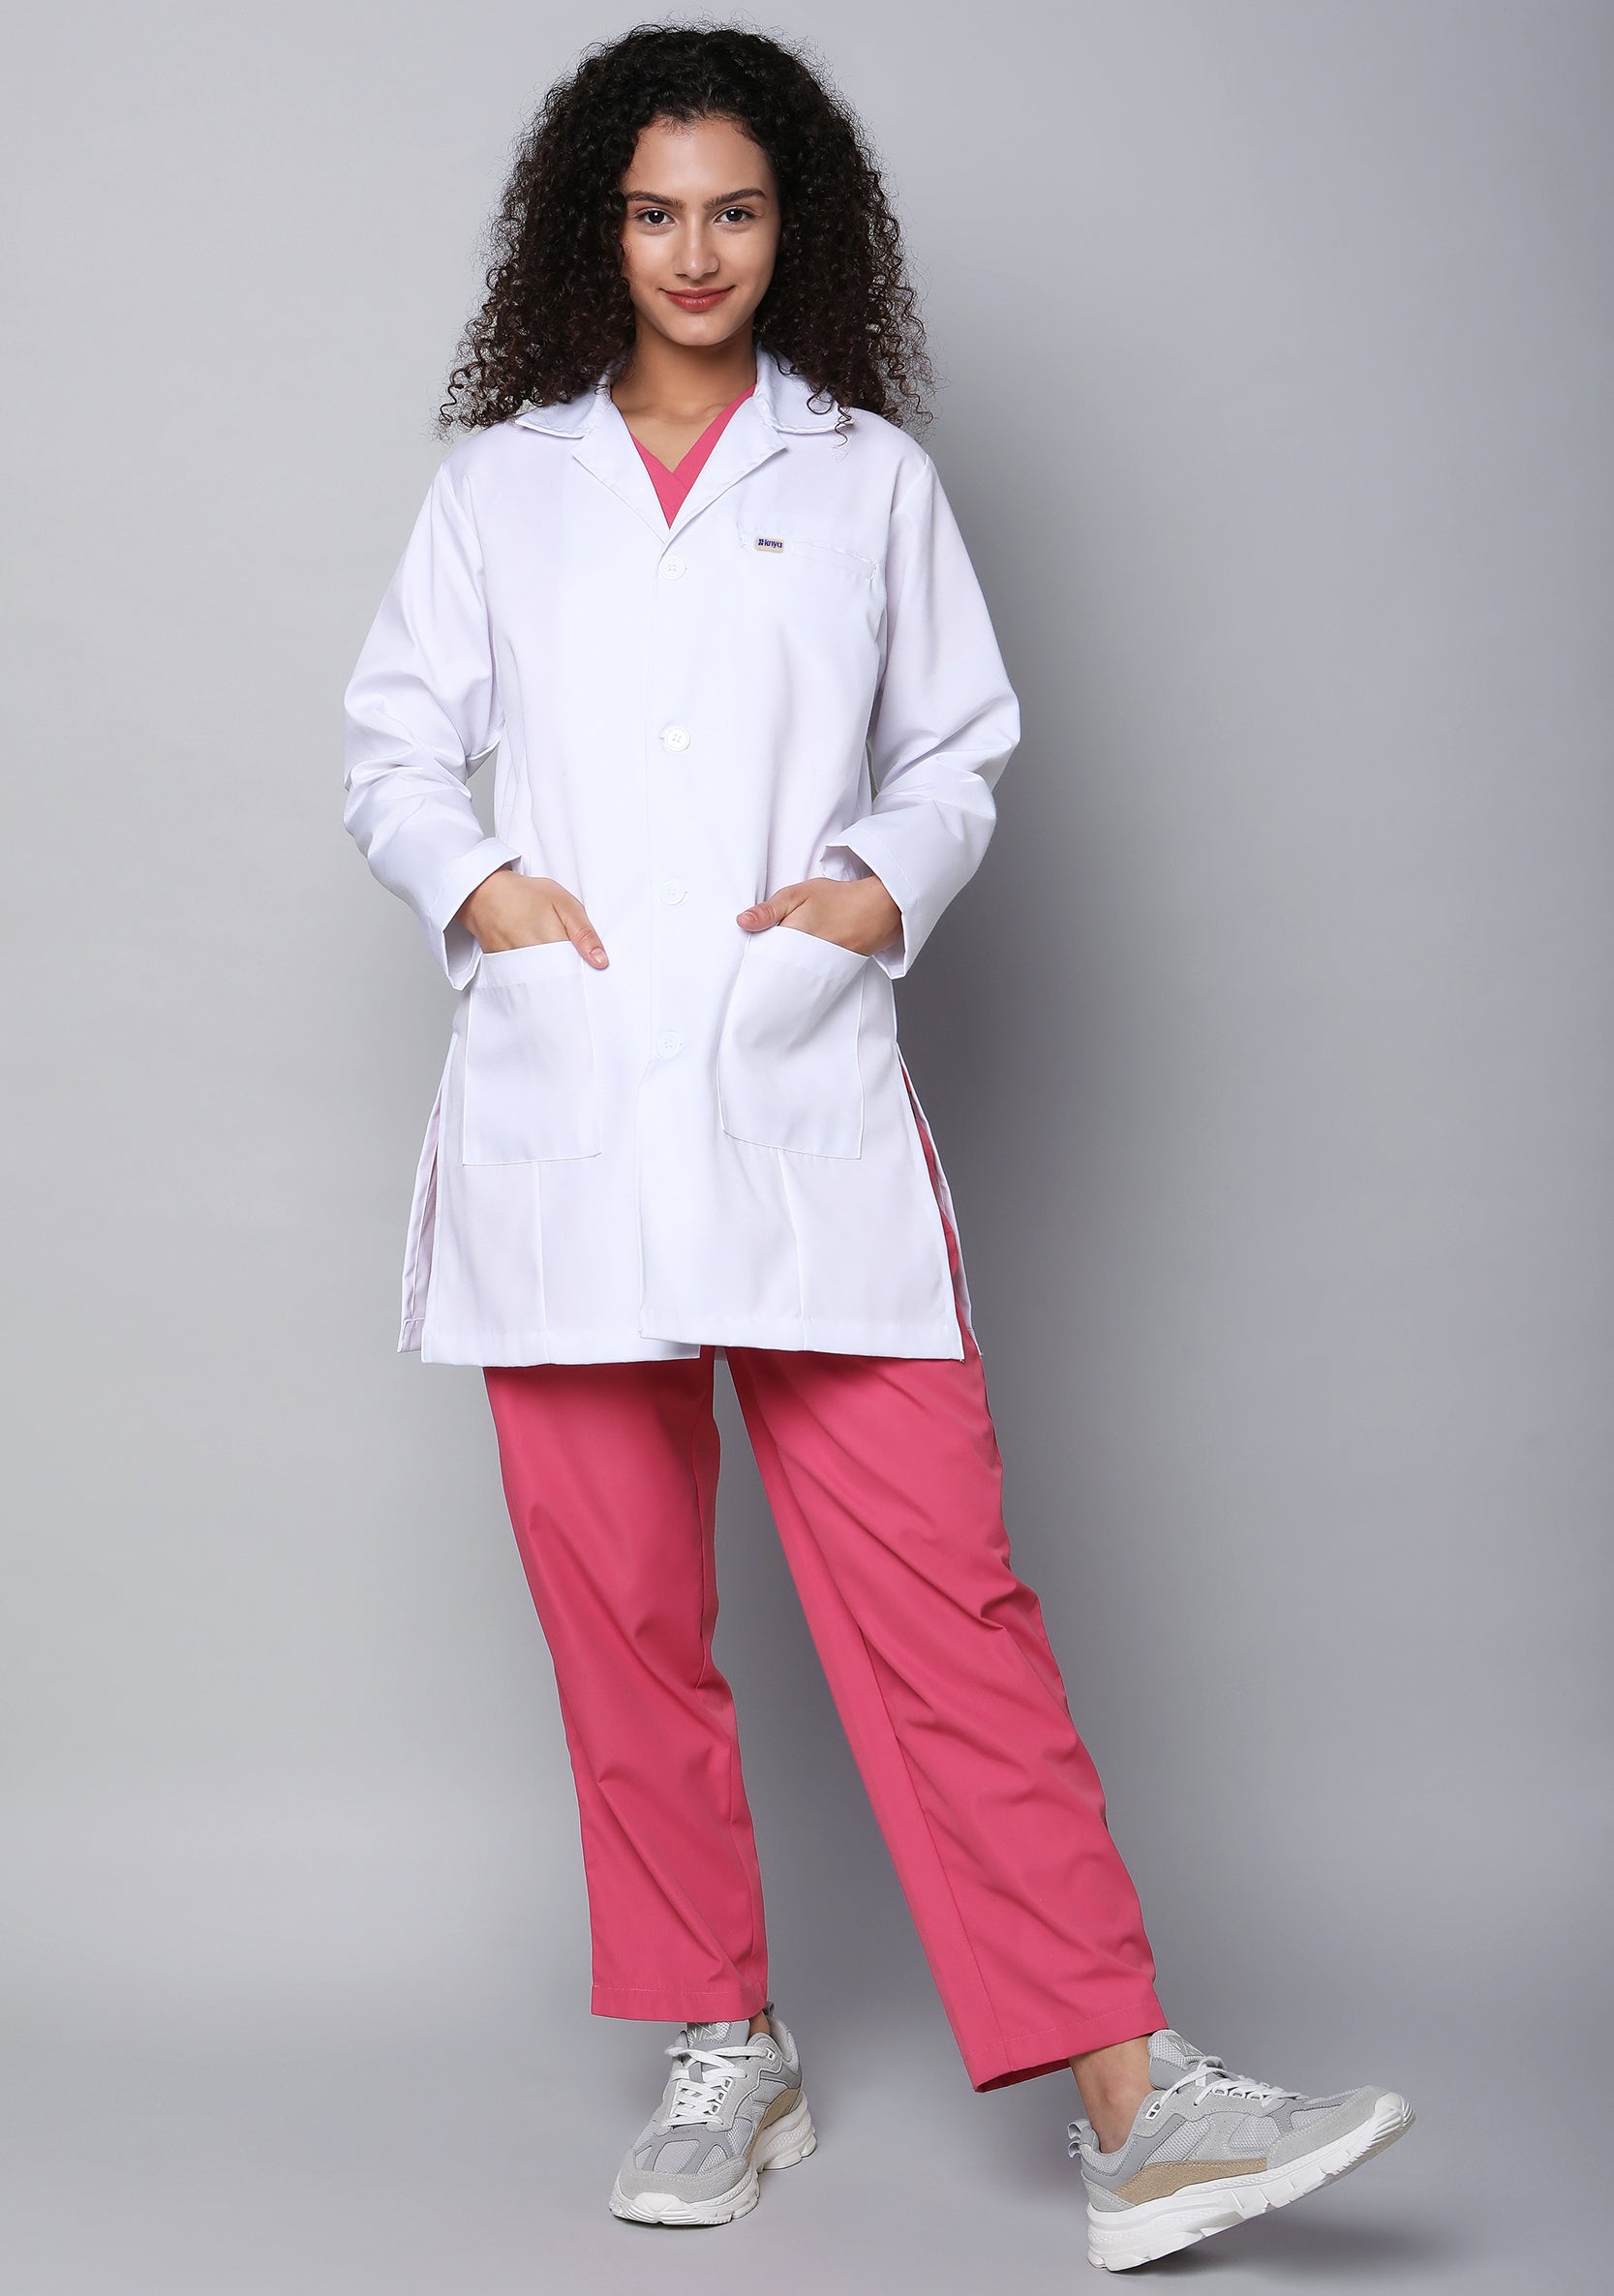 RANK Women's Polyester Cotton White Medical Lab Coat | Doctor's Apron  Hospital Dress | Doctor's Coat | Half Sleeve Coat Size - S (White) :  Amazon.in: Clothing & Accessories